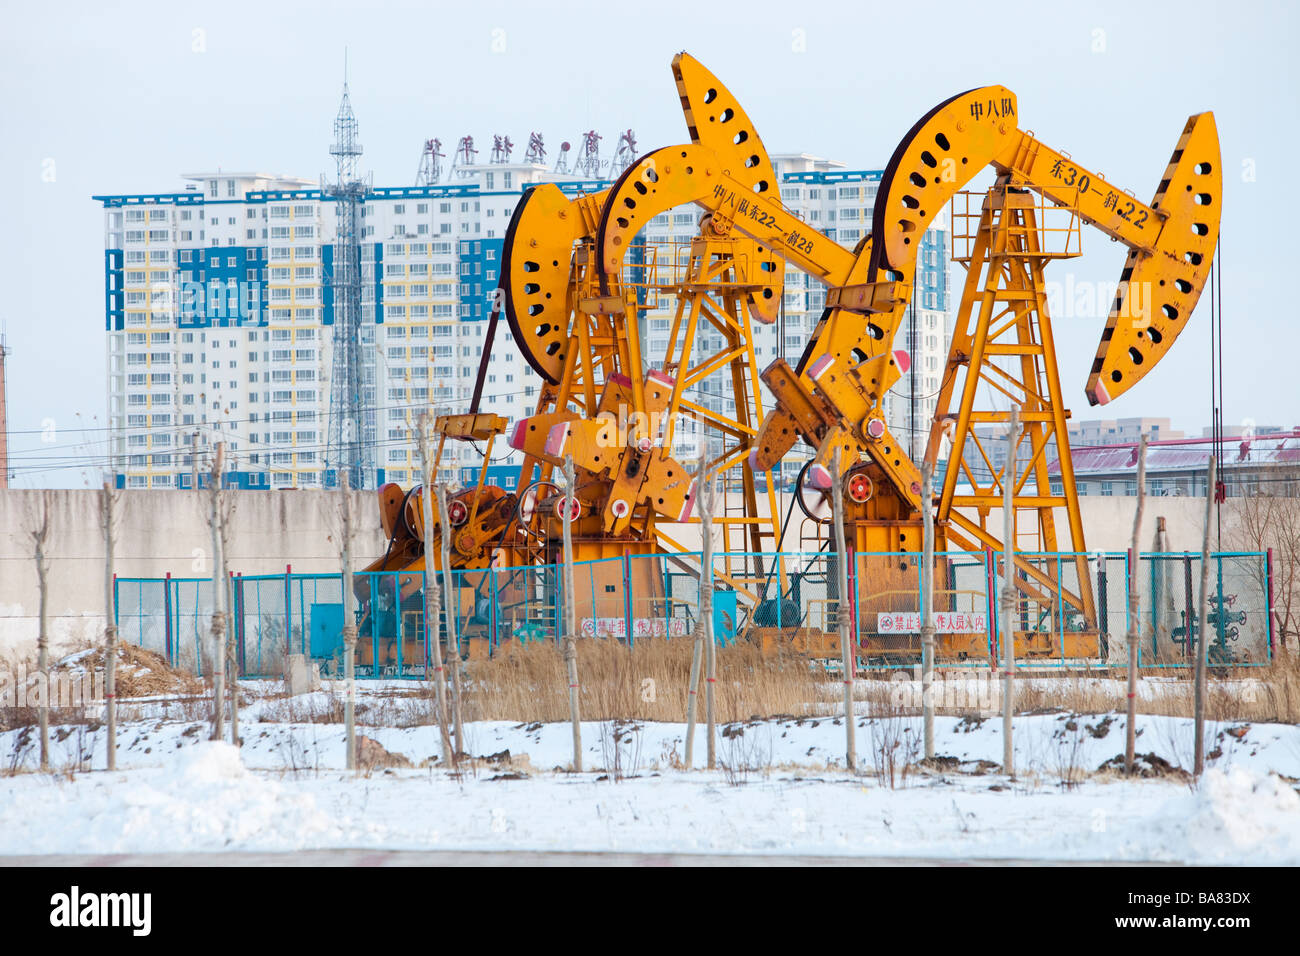 Nodding donkey oil pumps in the Daqing oil field in northern China Stock Photo